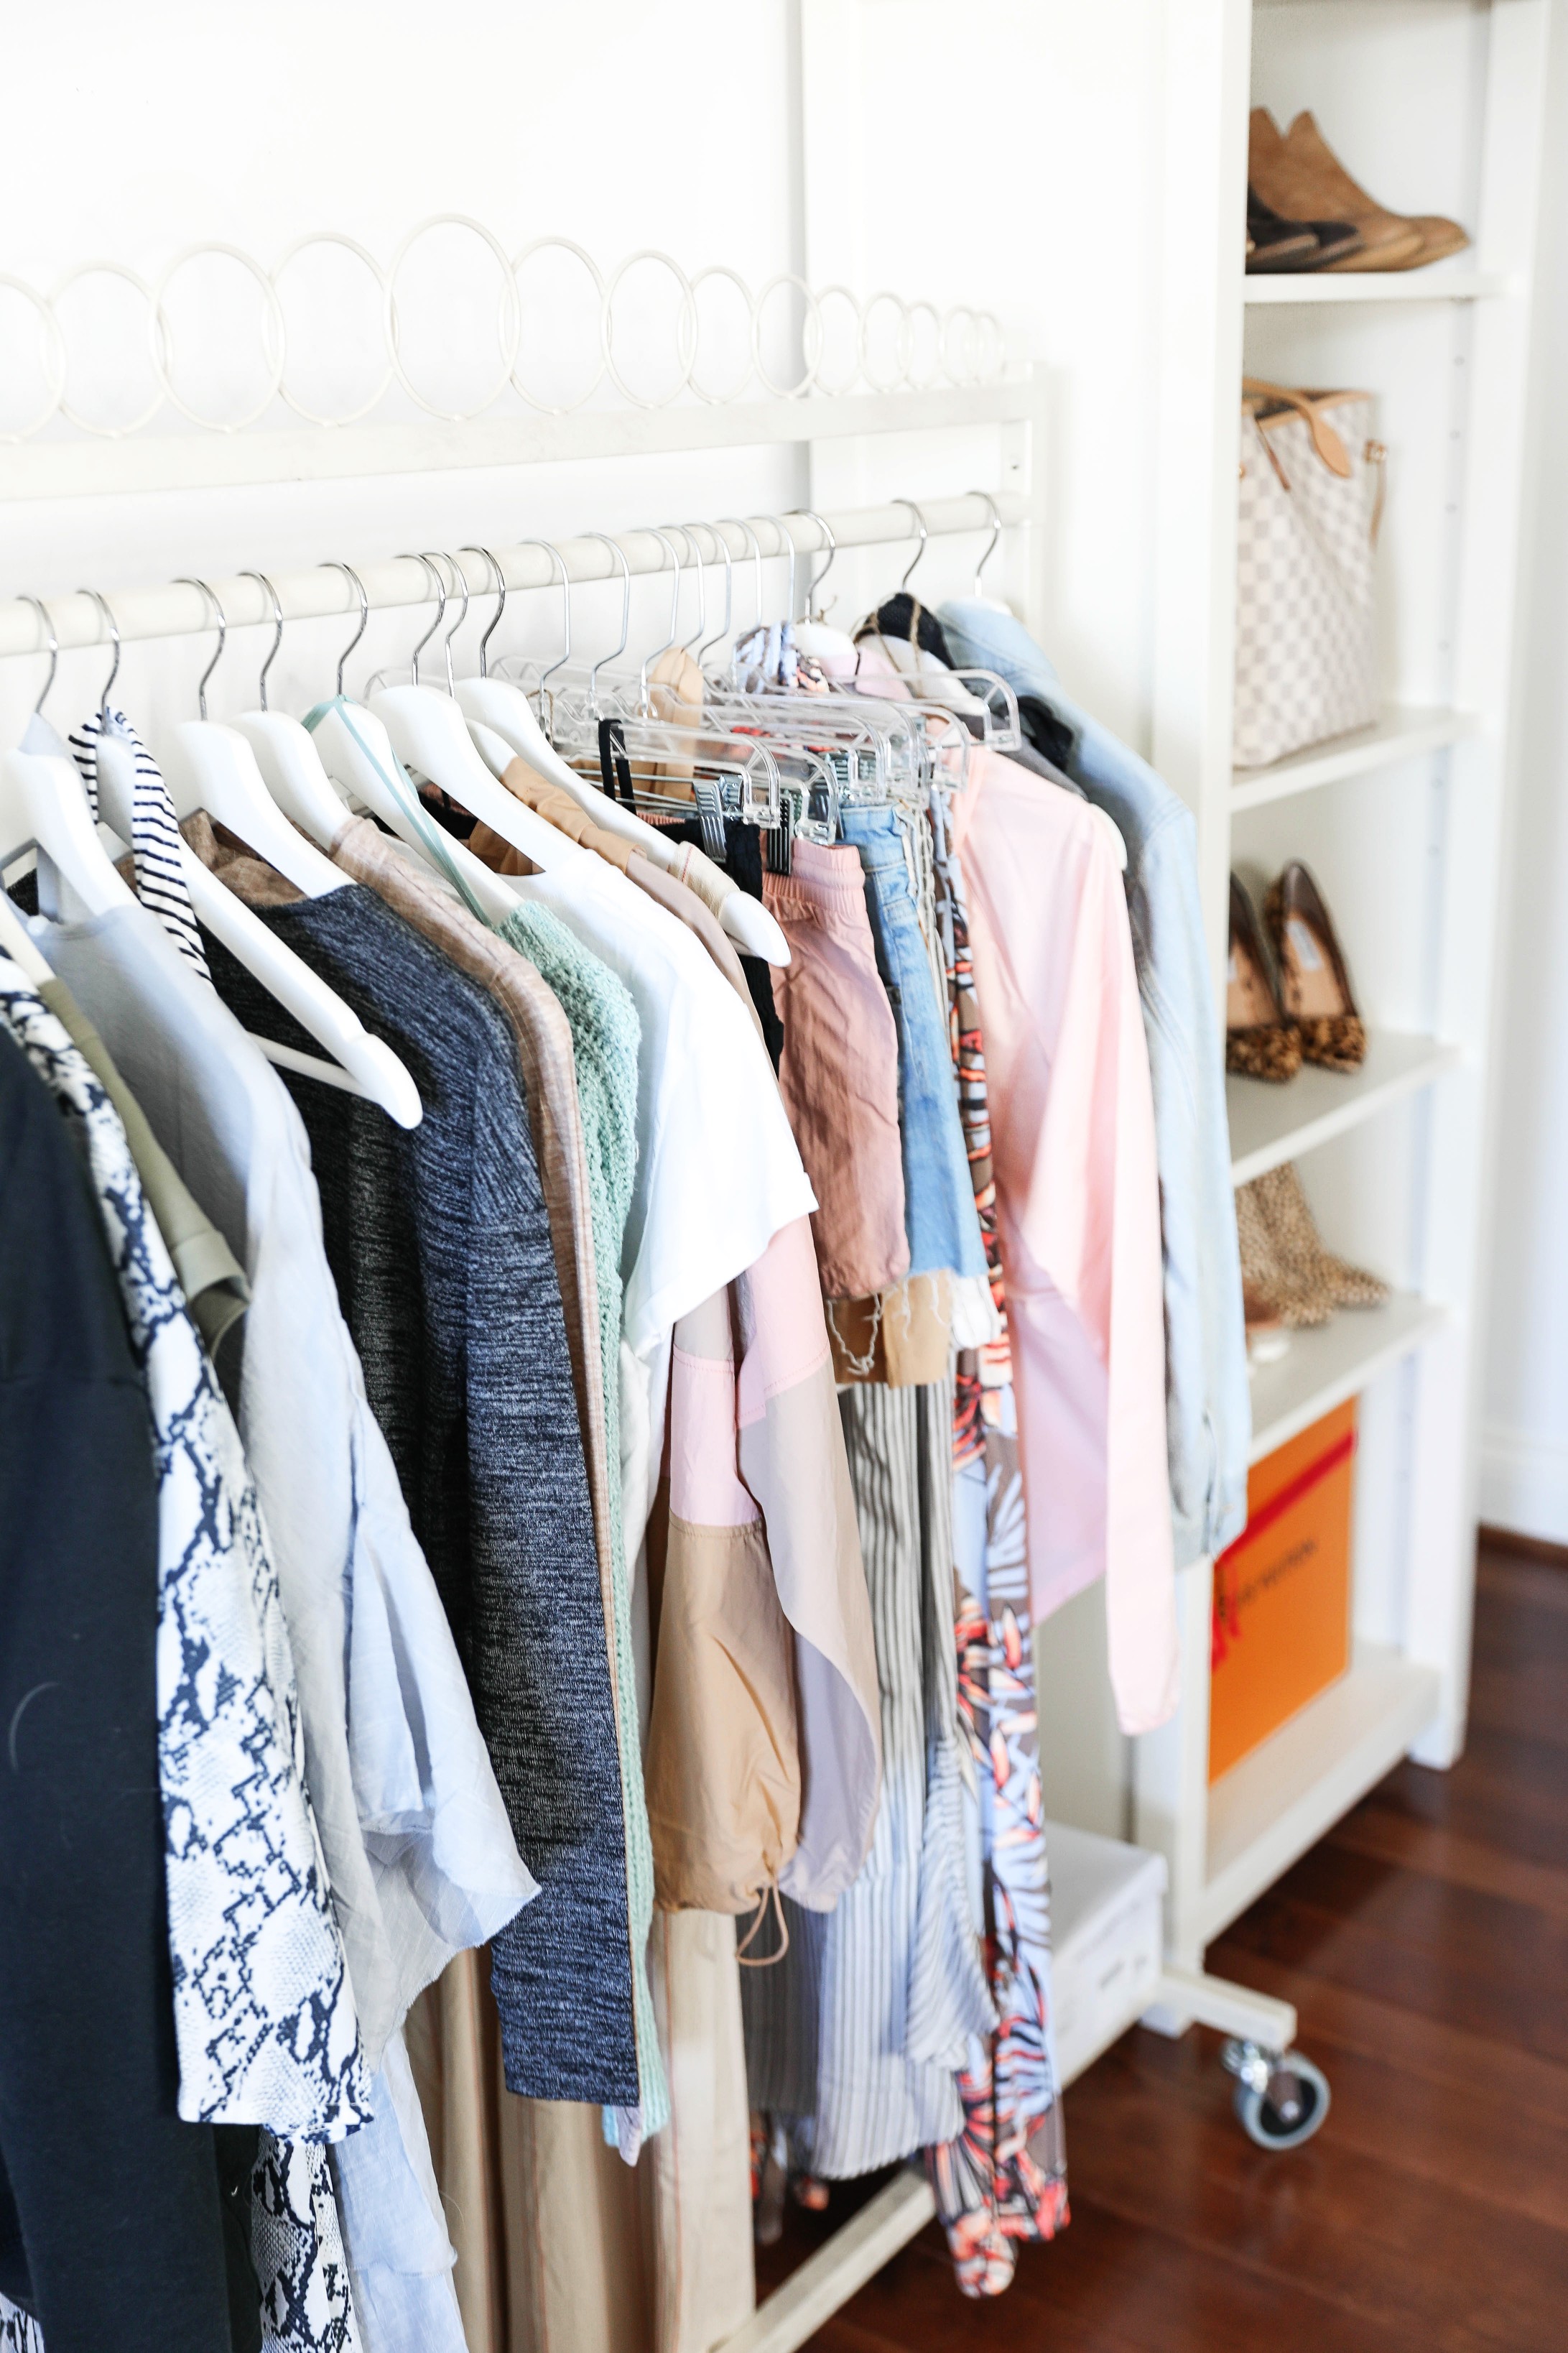 How I plan my outfits for trips and blog photos! Total closet and wardrobe goals! I love my new garment rack right next to my shoe rack and fashion shelves! All the travel packing planning tips you need! Details on fashion blog daily dose of charm by lauren lindmark